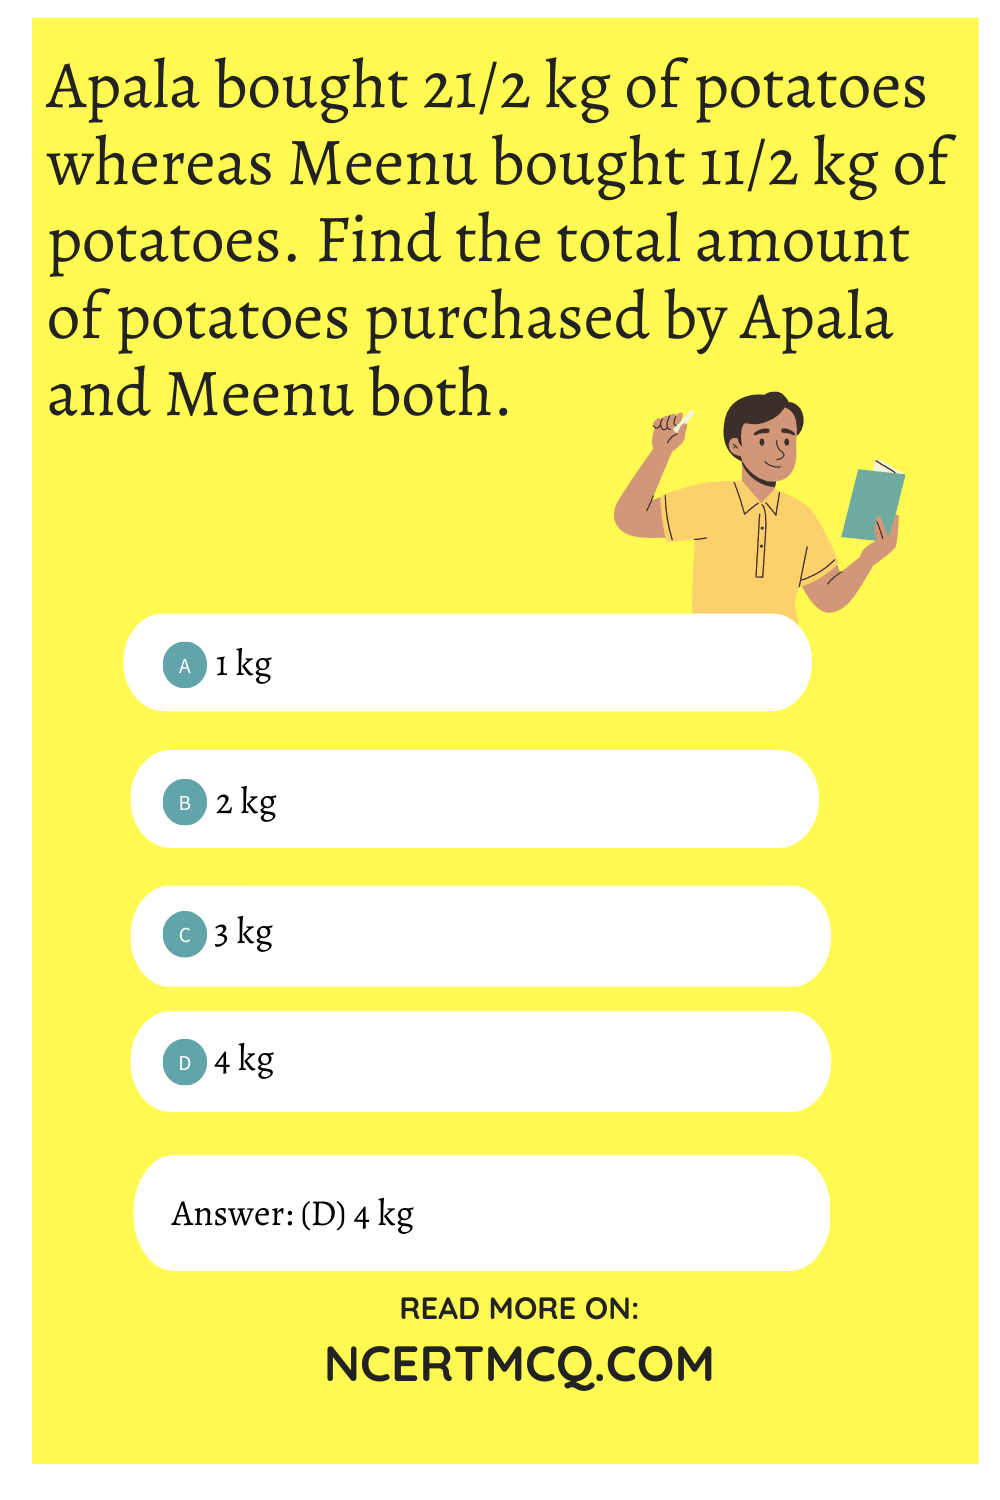 Apala bought 21/2 kg of potatoes whereas Meenu bought 11/2 kg of potatoes. Find the total amount of potatoes purchased by Apala and Meenu both.